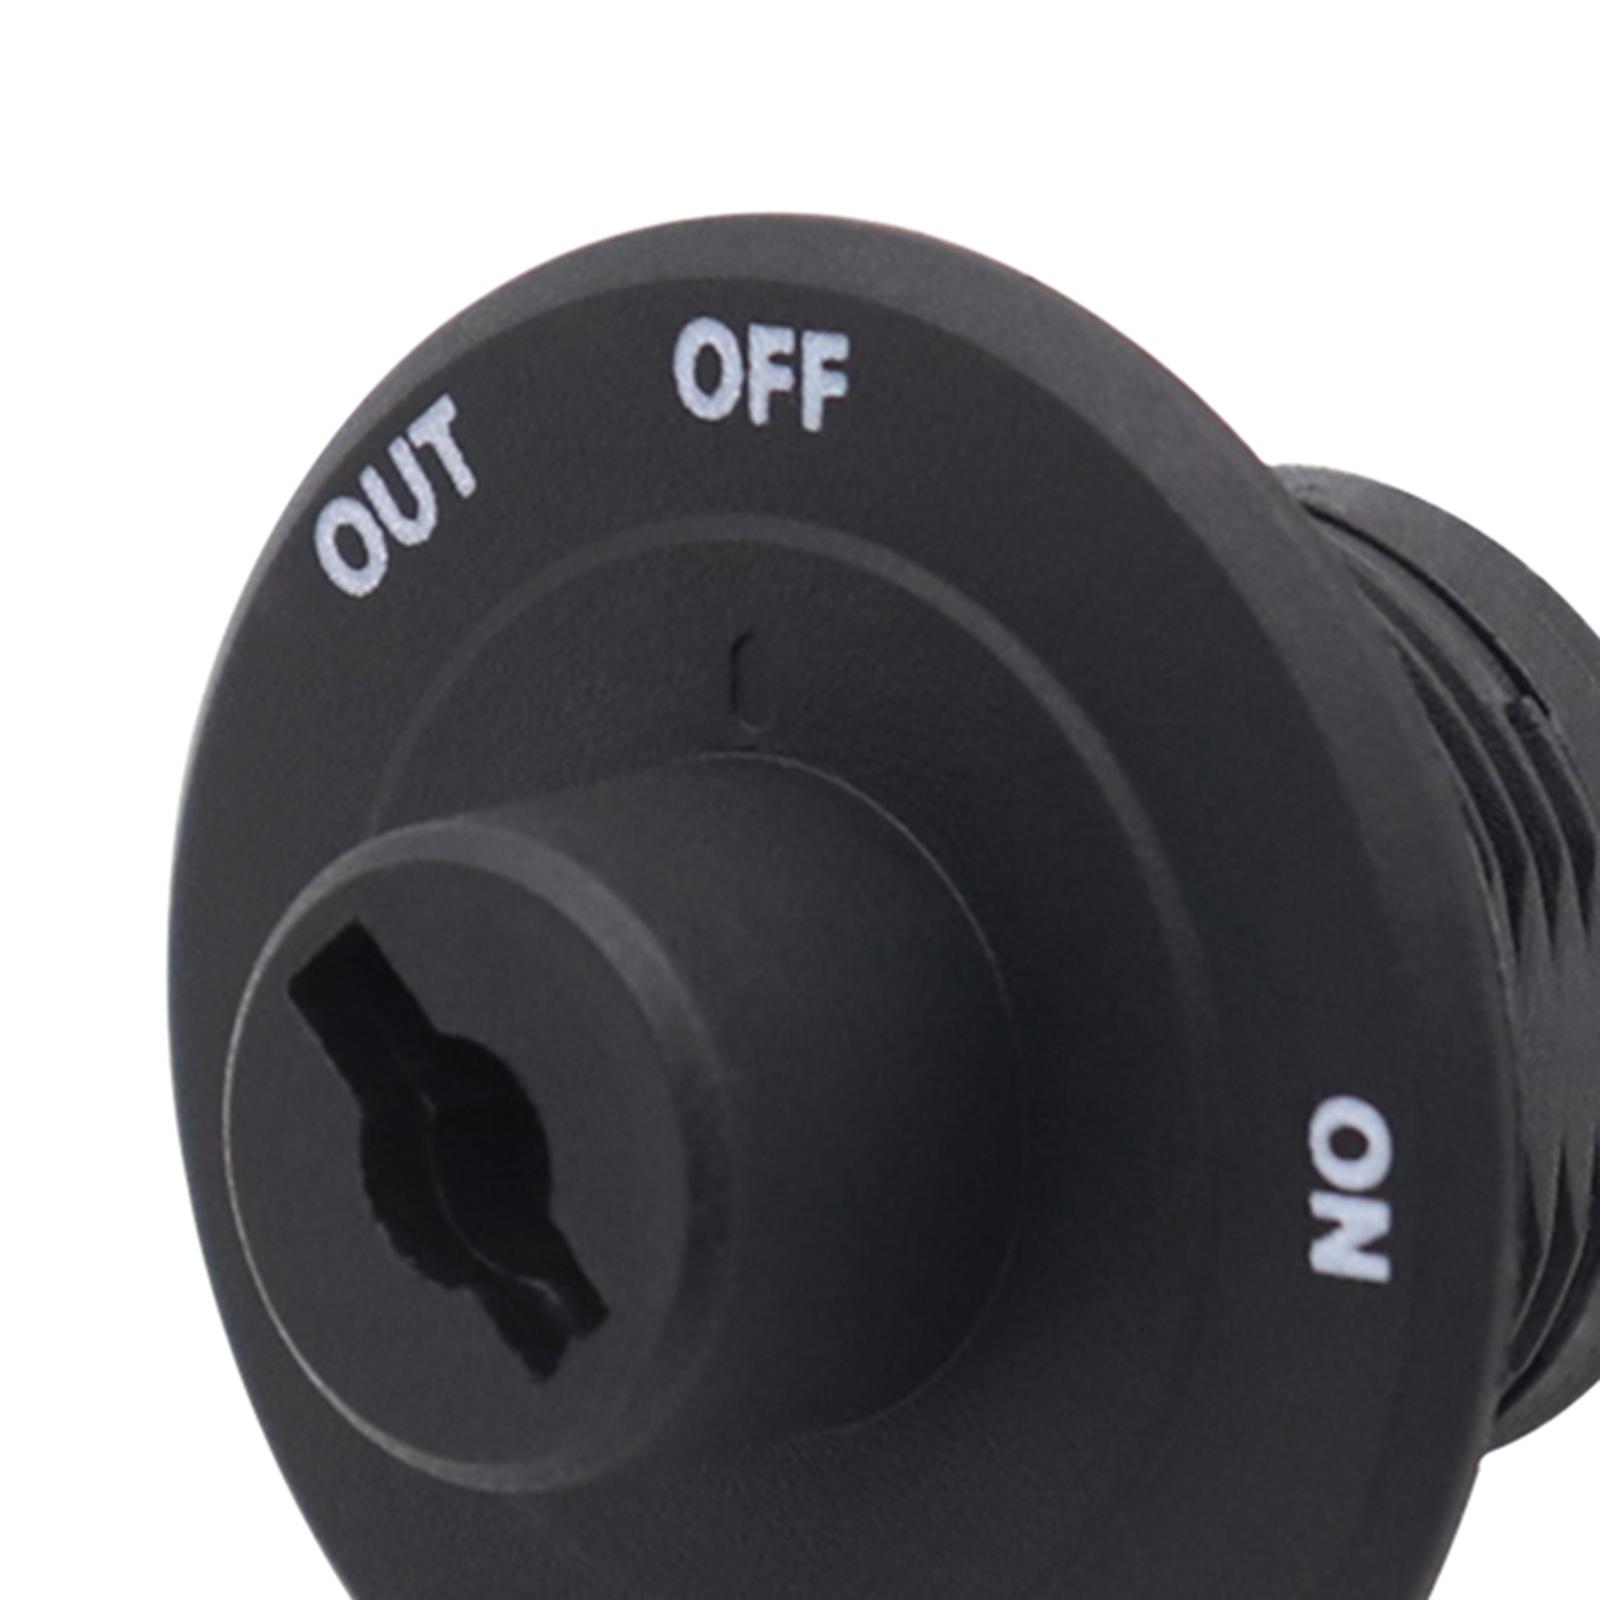 Cut Off Switch Portable Power Isolator Parts Multipurpose for Car